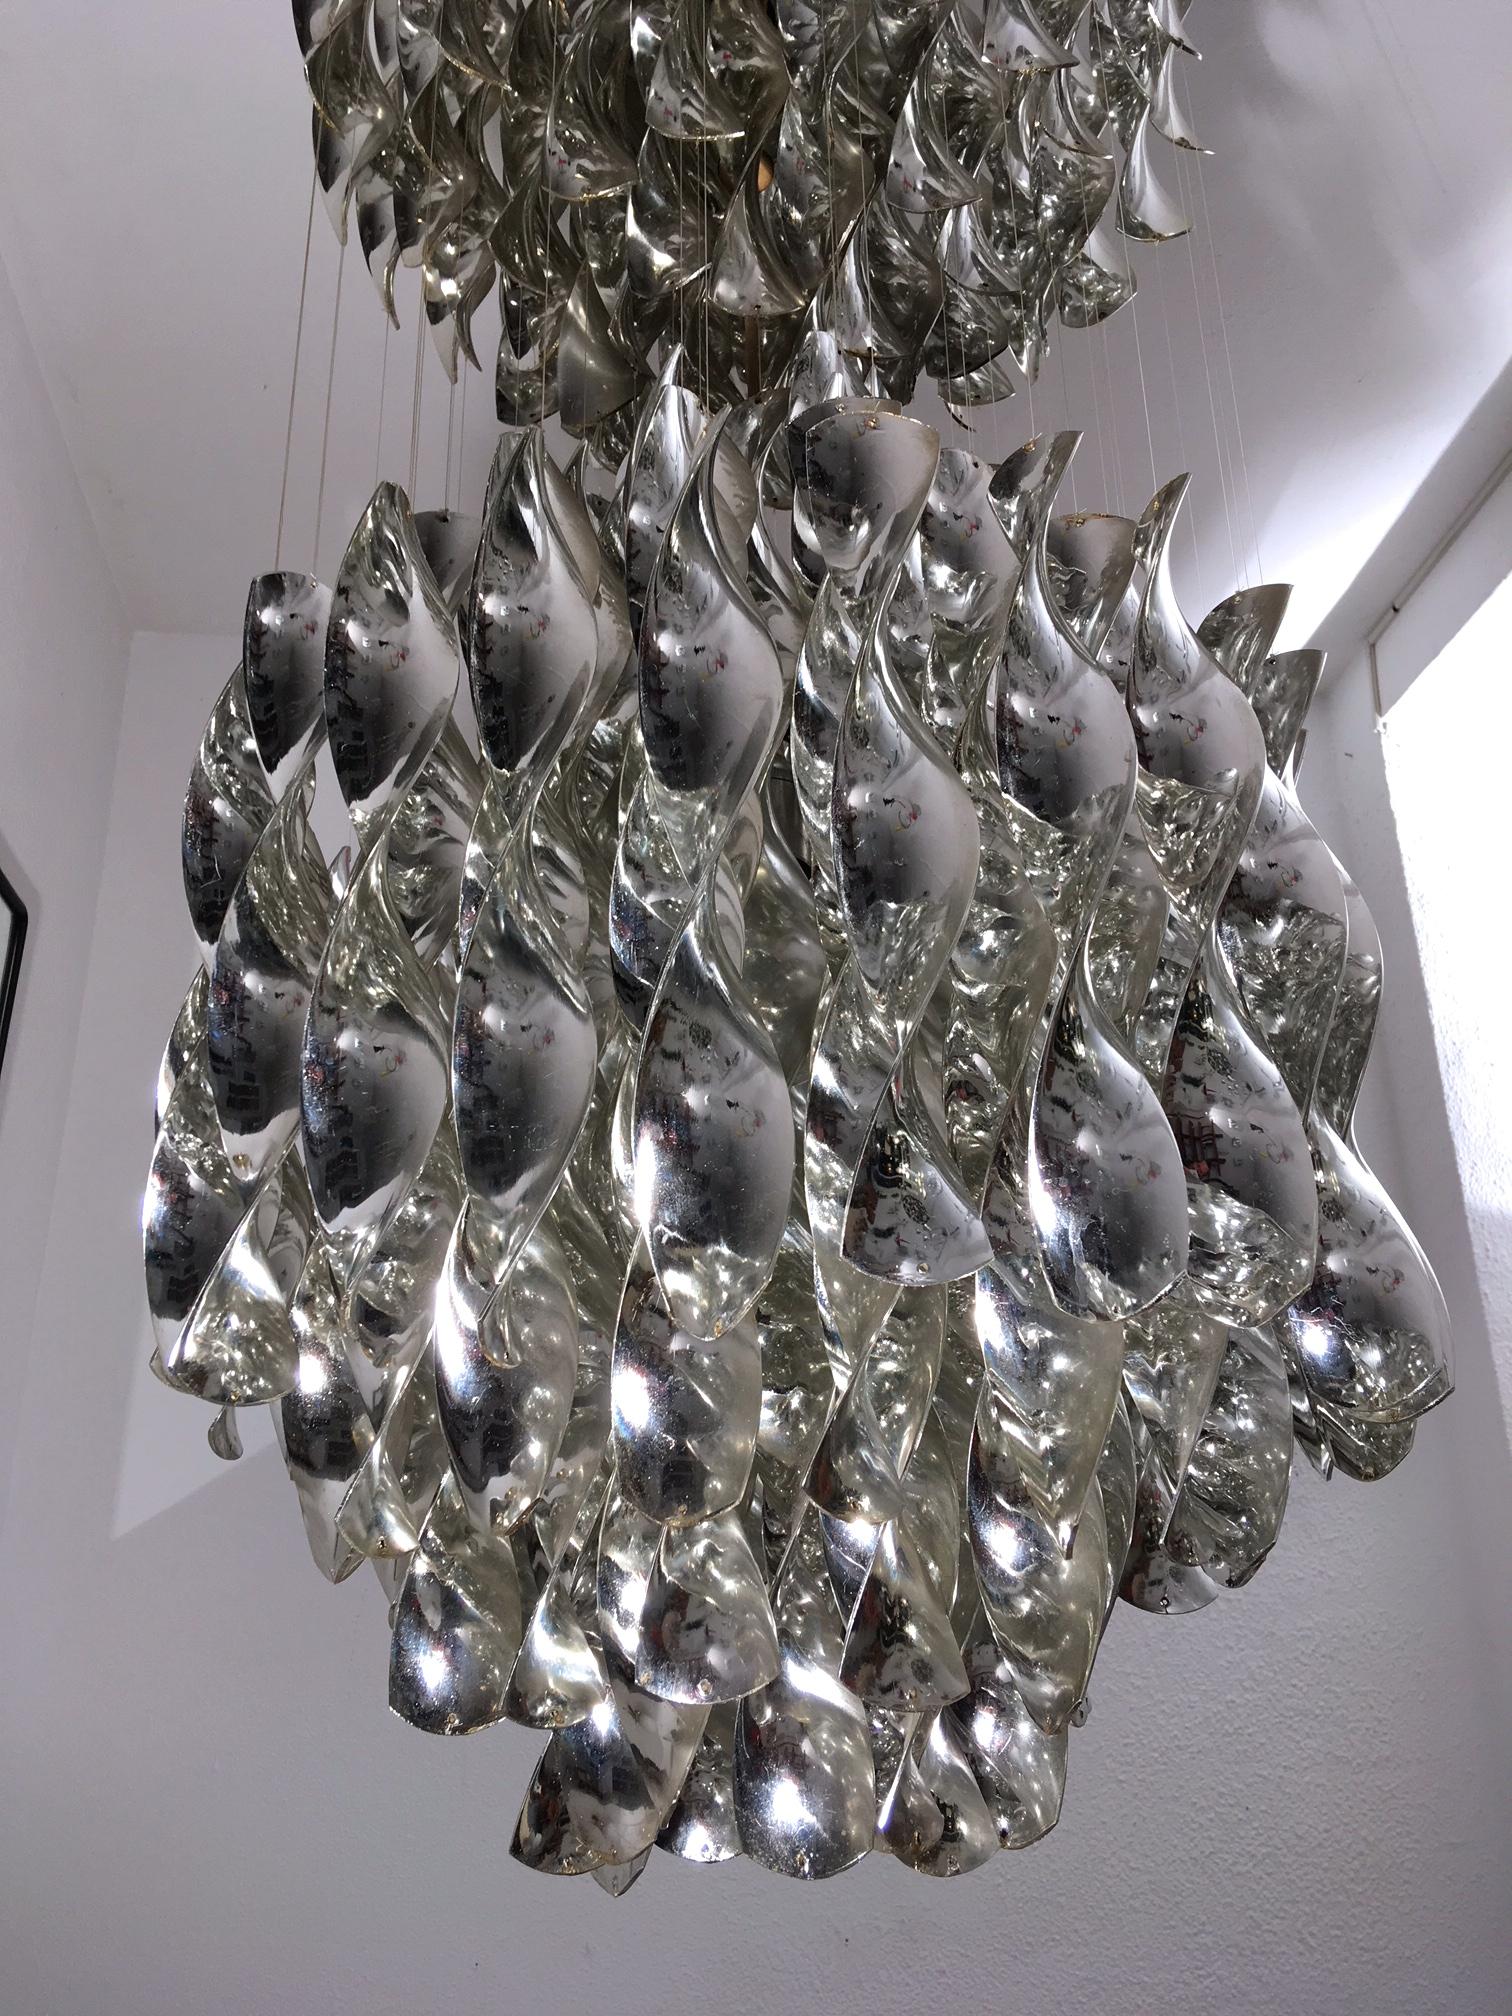 Very rare original vintage SP2 chromium-plated spirals pendant lamp by Verner Panton produced by J. Lüber AG Switzerland, 1969
Ceiling plate attached with nylon threads, two clusters of spiral elements.
Measures: 150 cm high, 48 cm diam.
Very